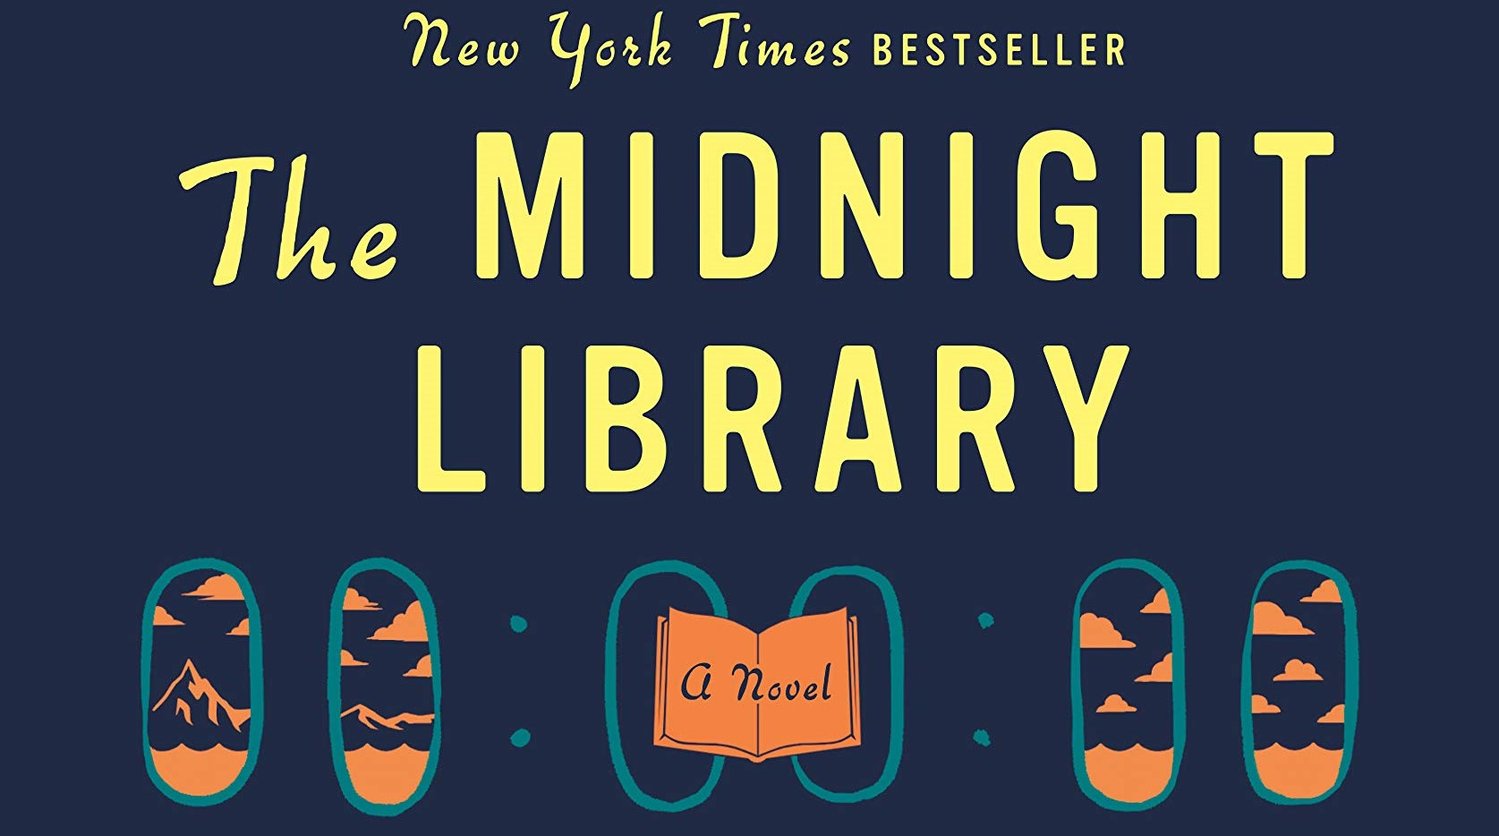 Matt Haig's "The Midnight Library" is the 2022 One Book One Island selection.